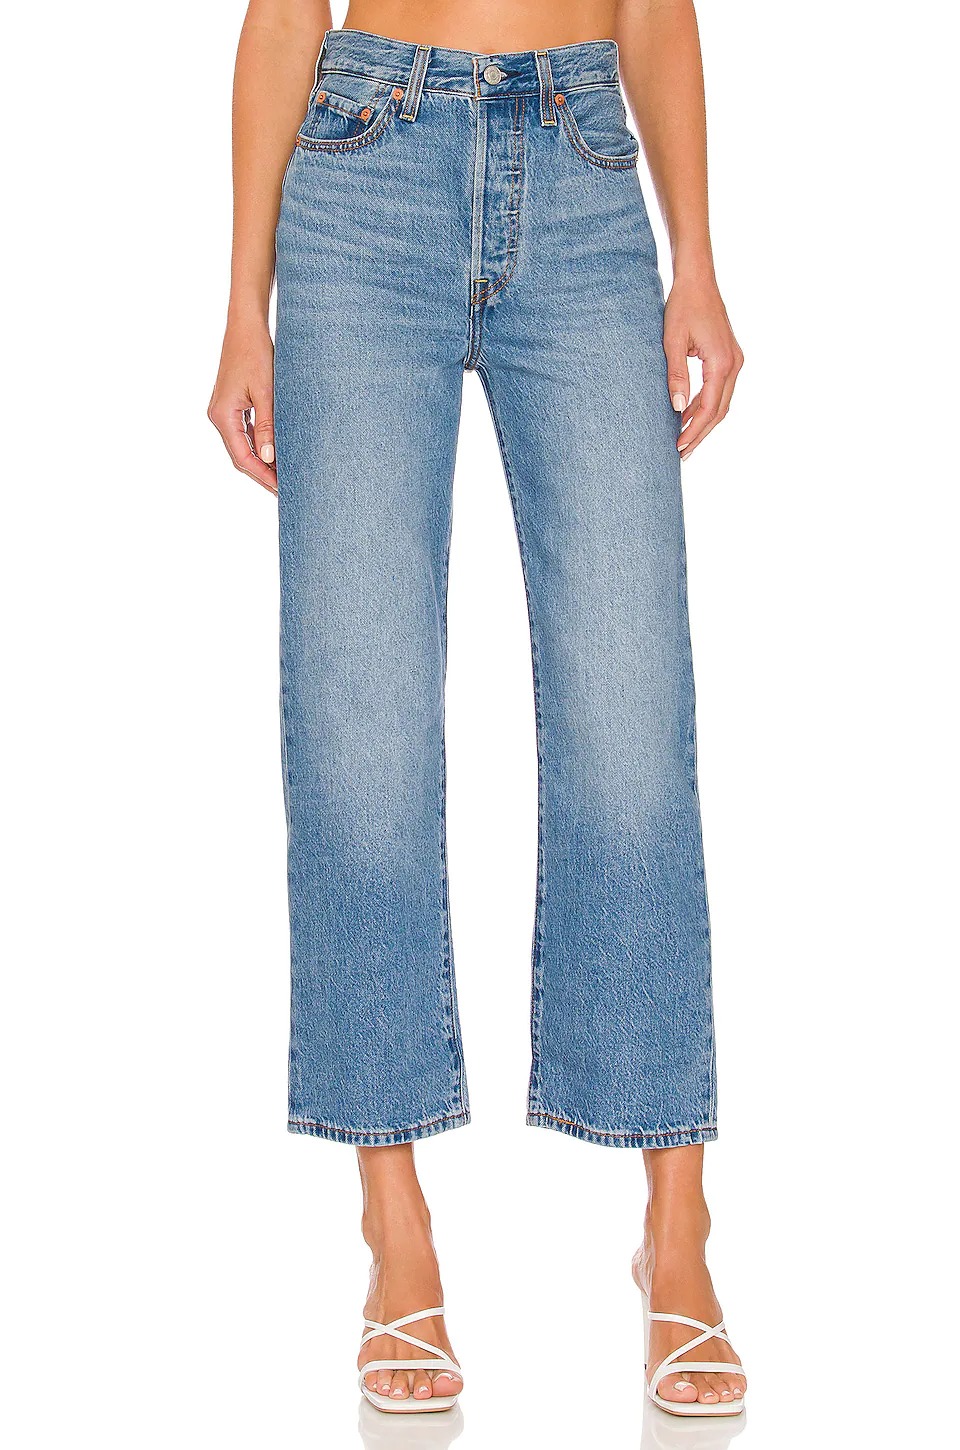 The 11 Best Jeans for Women Over 50 | Who What Wear